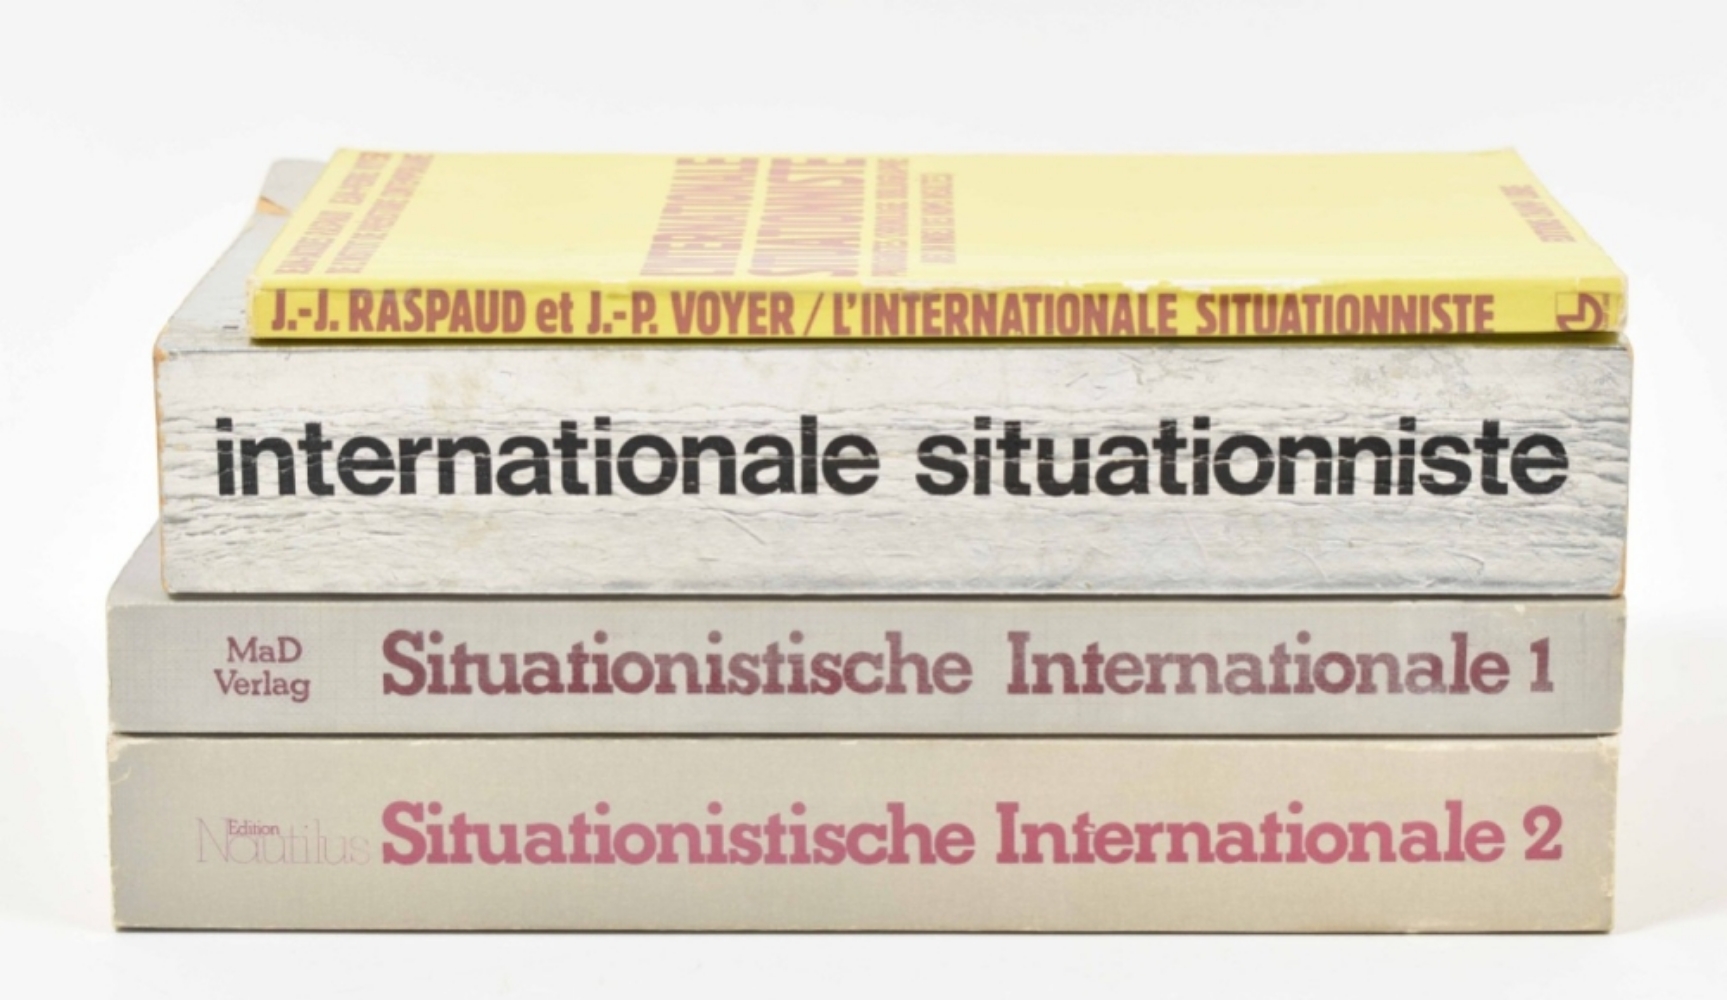 [Situationists] L'Internationale Situationniste